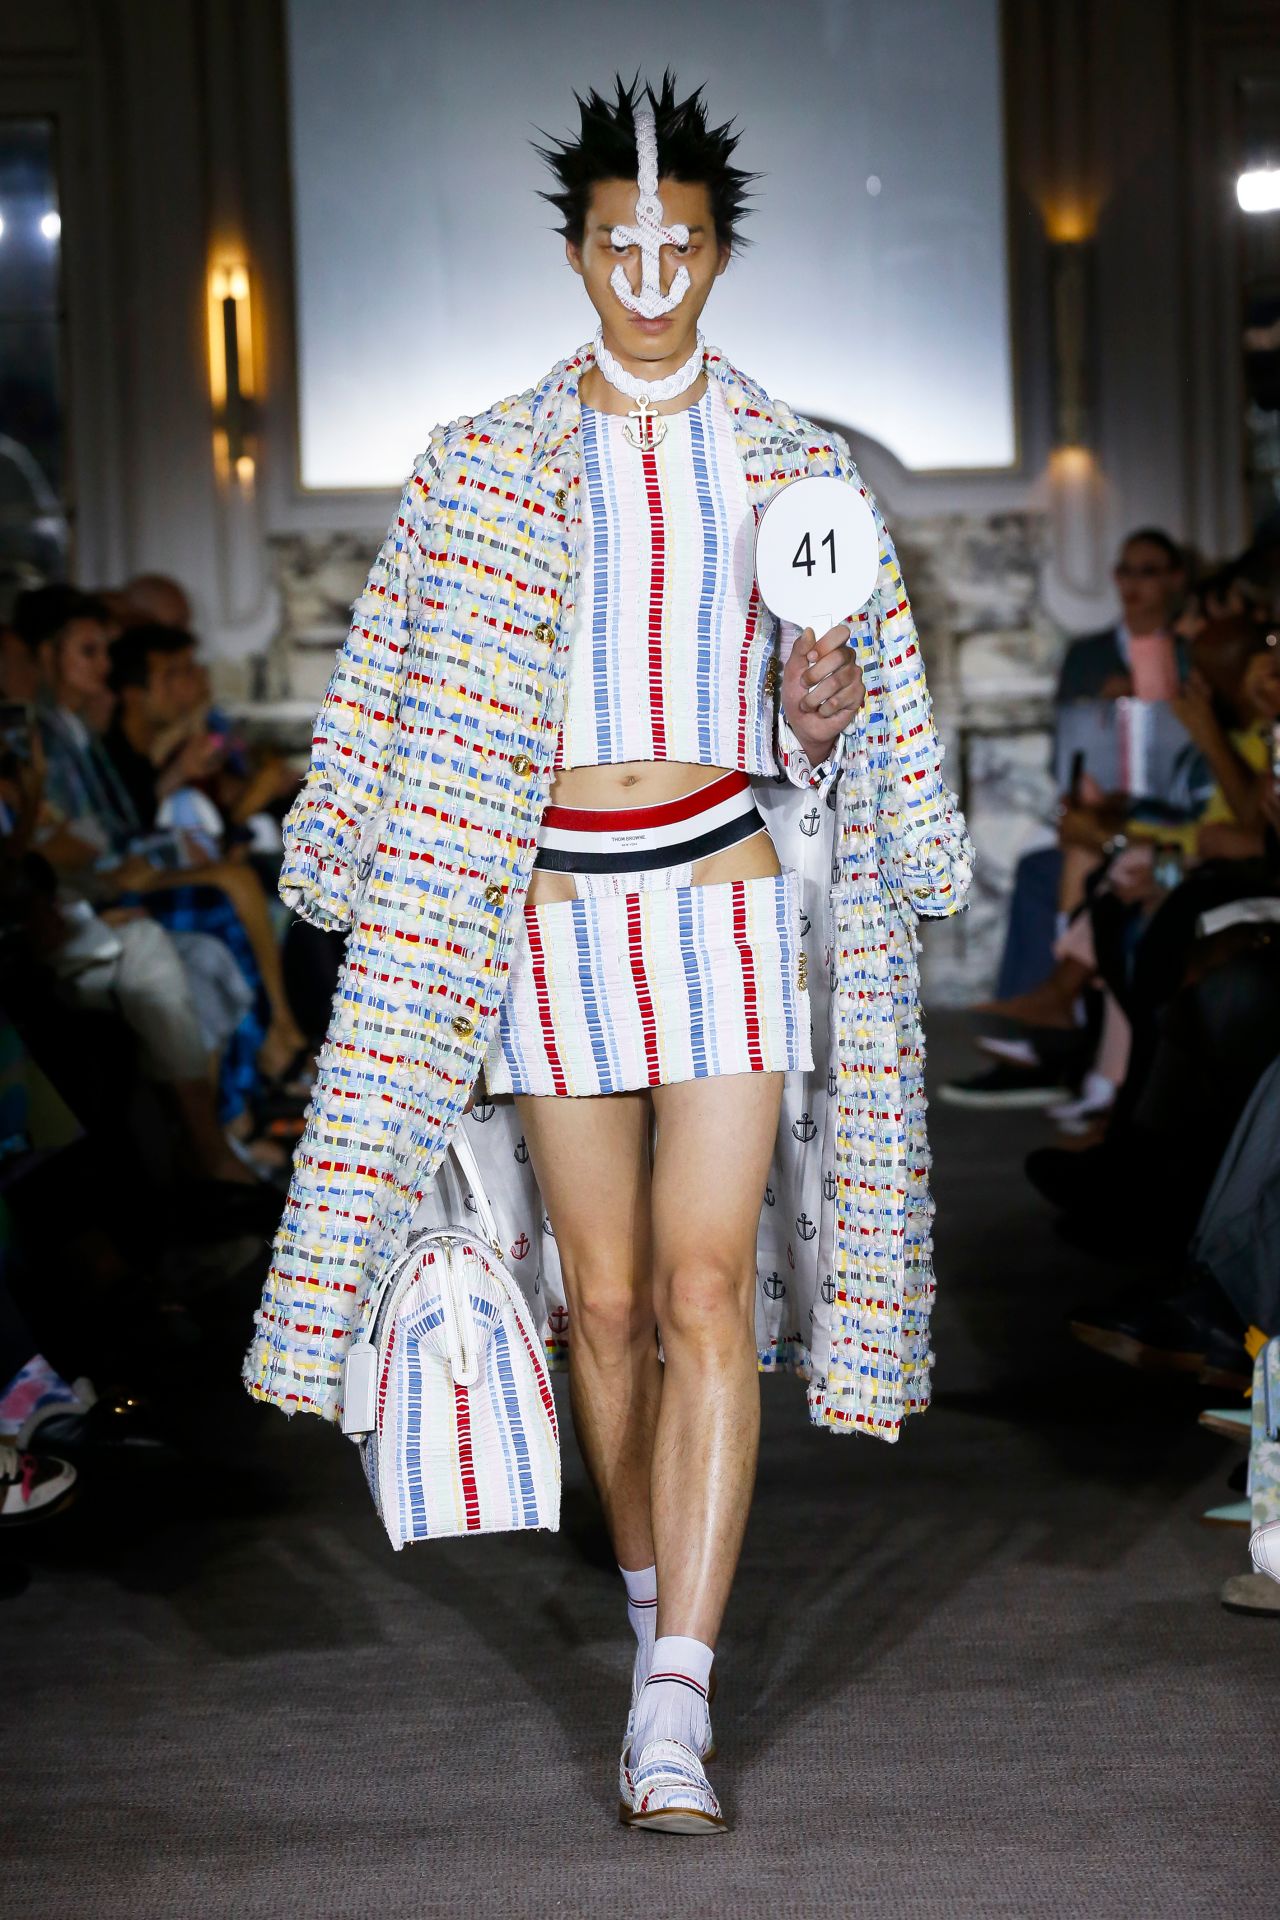 At Thom Browne, peak-a-boo G-strings were switched out for exposed jock straps.